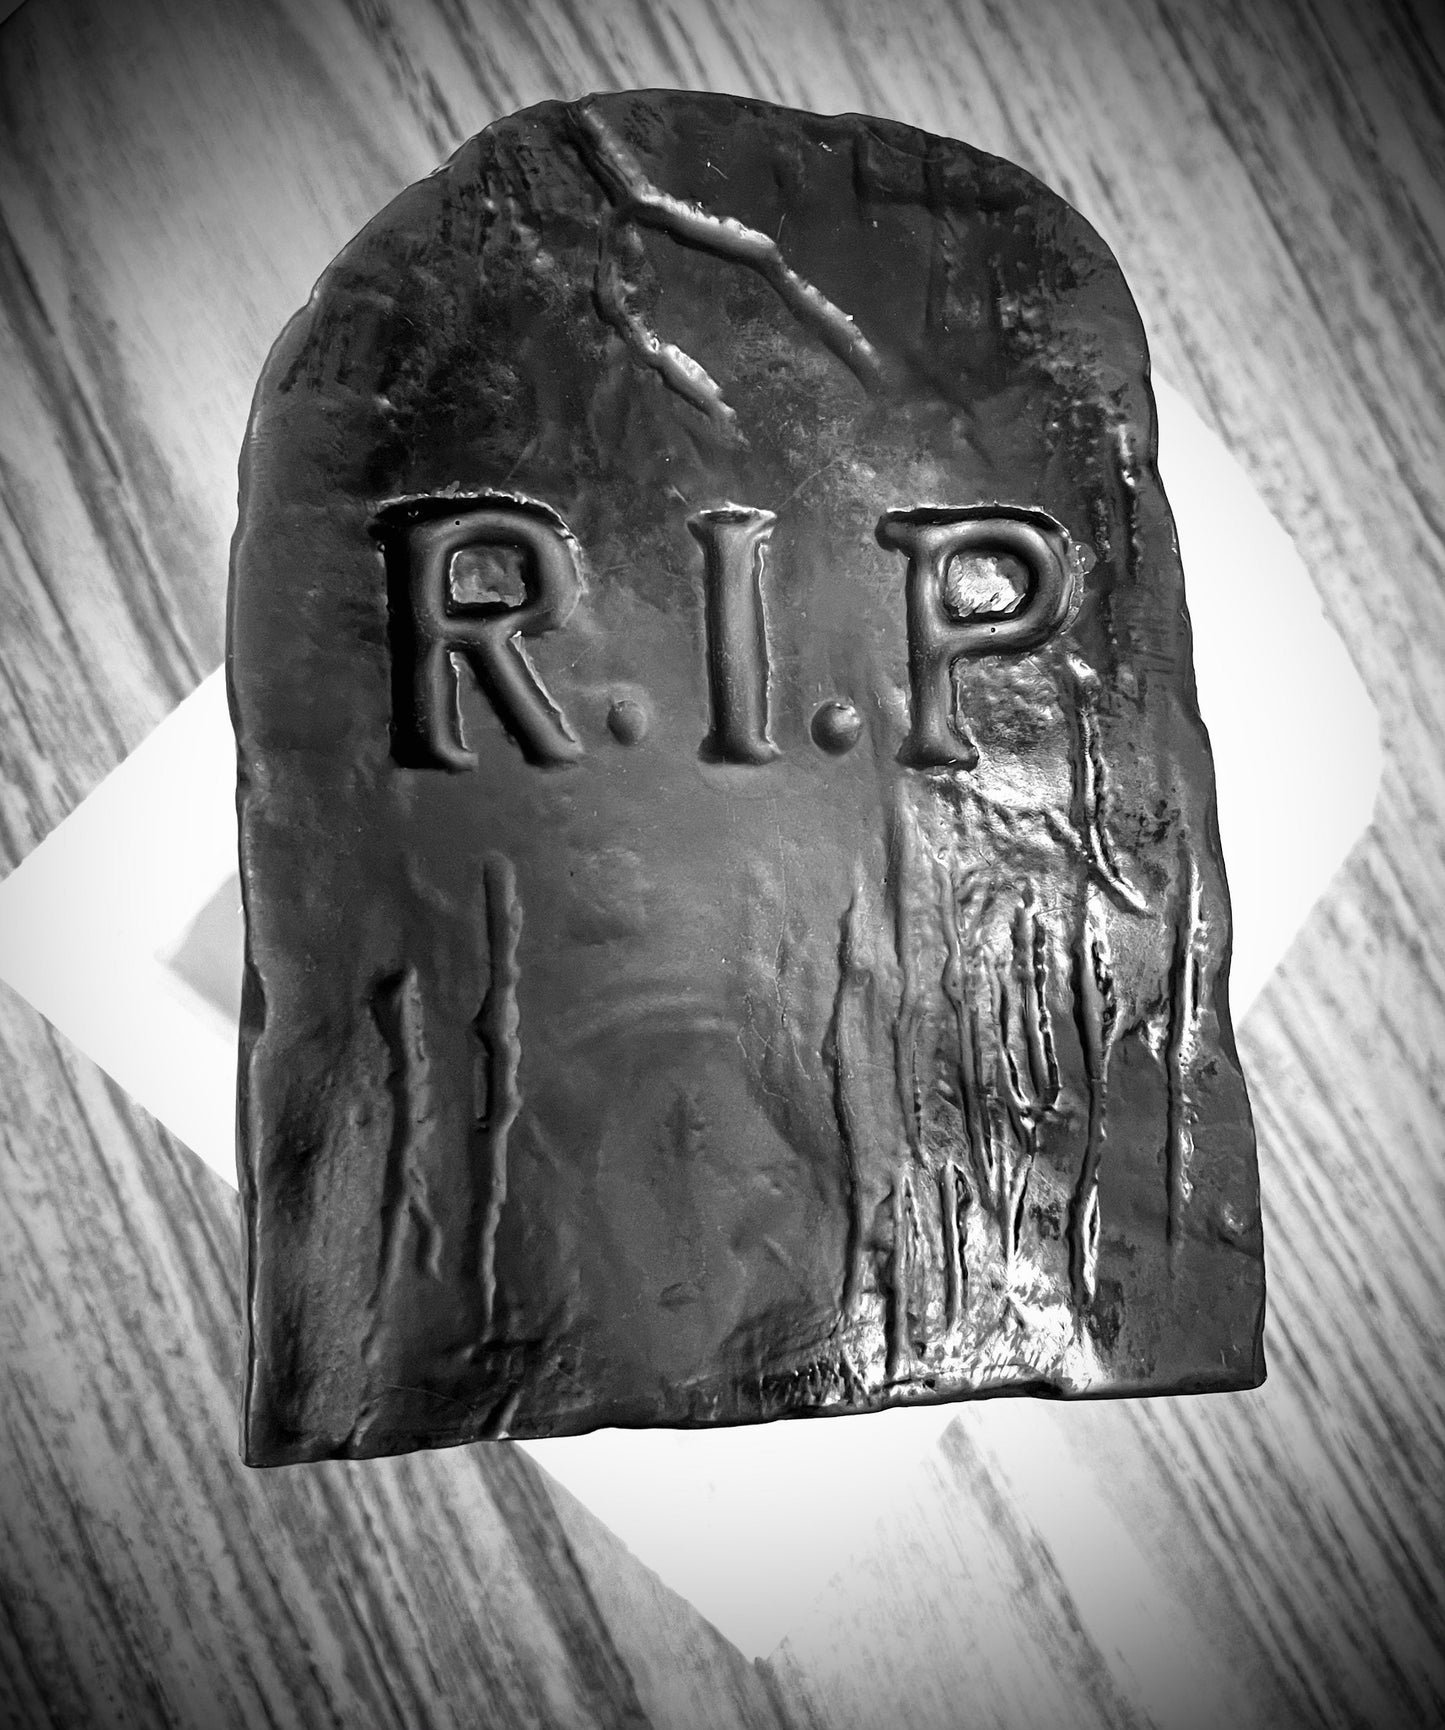 Silicone tombstone candle mold - grave stone mold - 4” - funeral candle Mold - spell witch craft mold - homemade